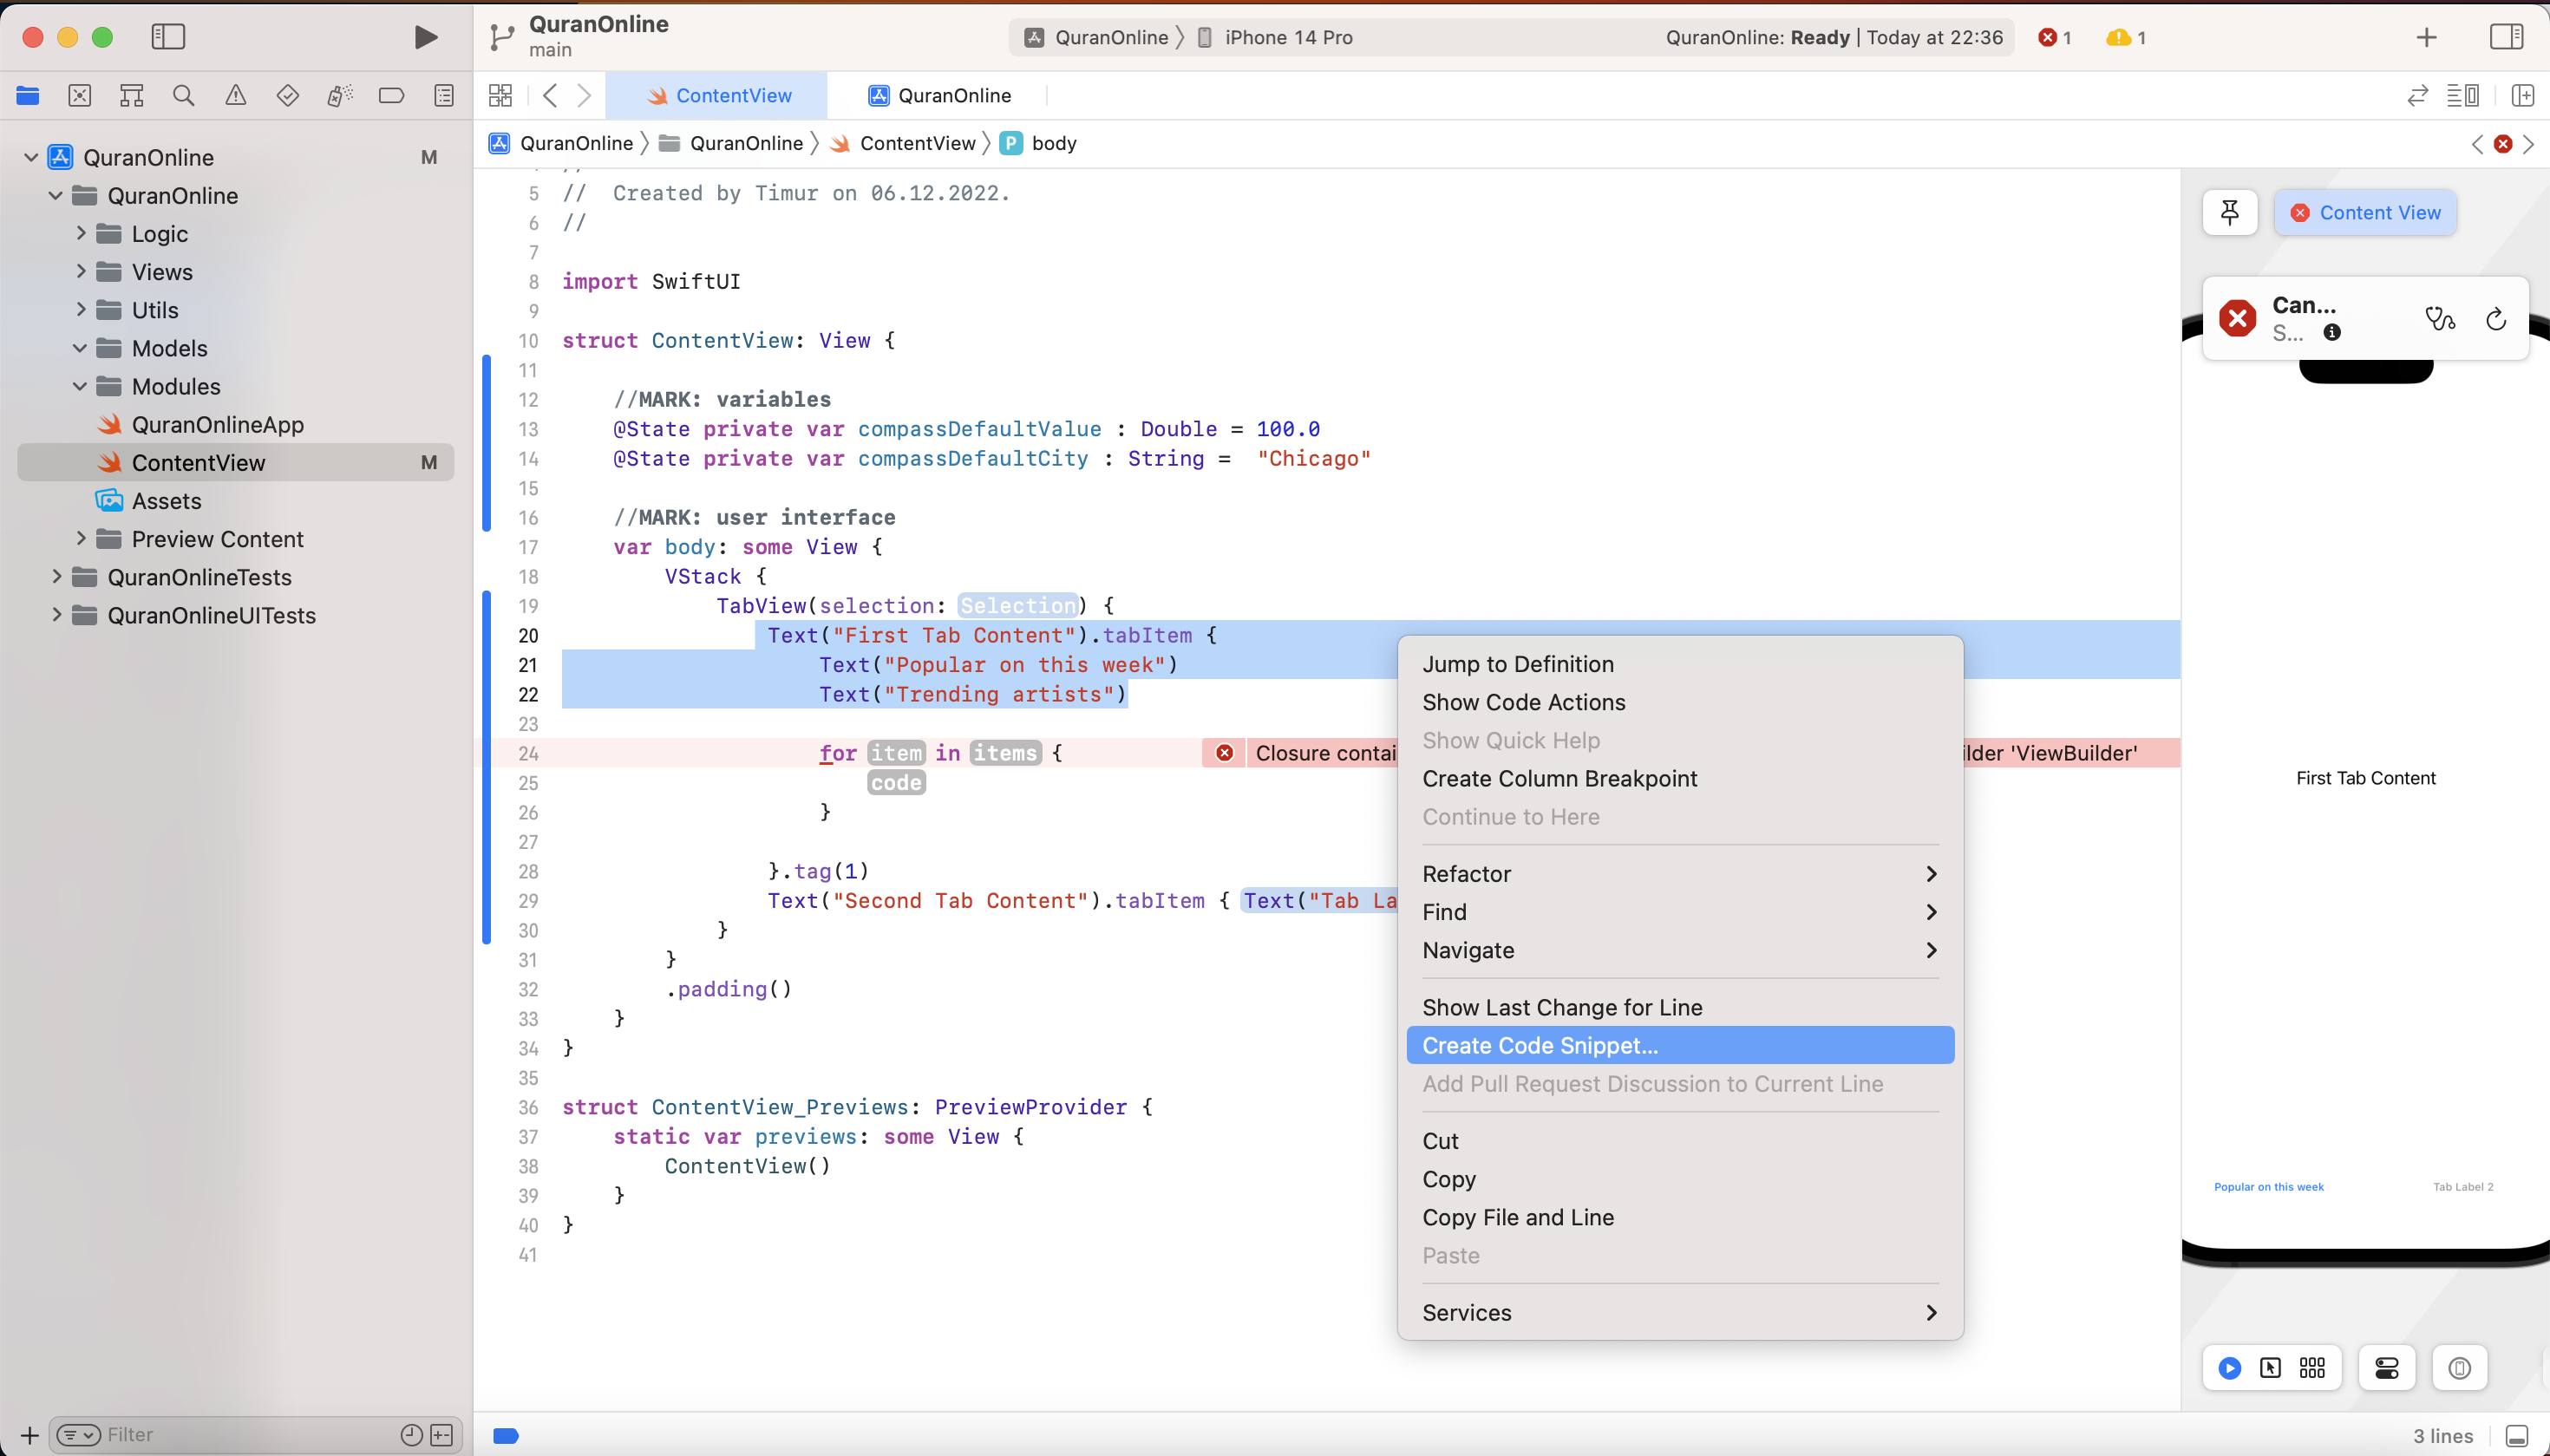 Xcode create snippet code